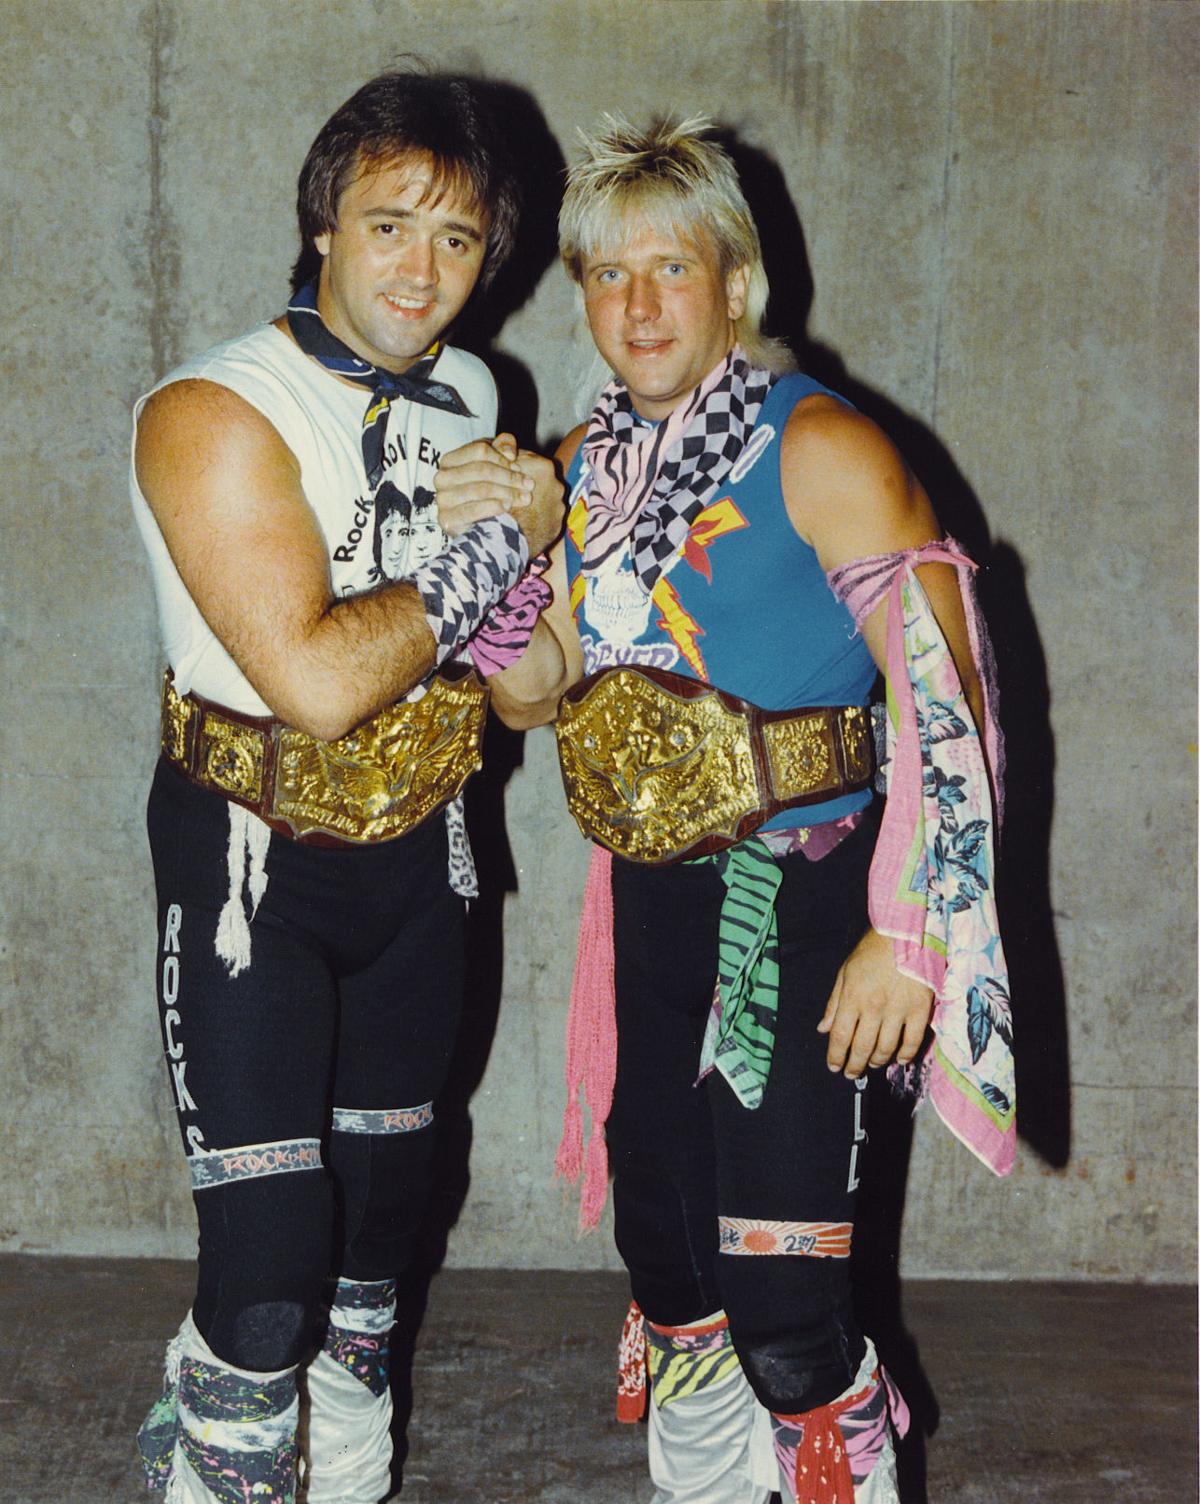 Wrestling's Rock 'n' Roll Express tag team is here to stay ...